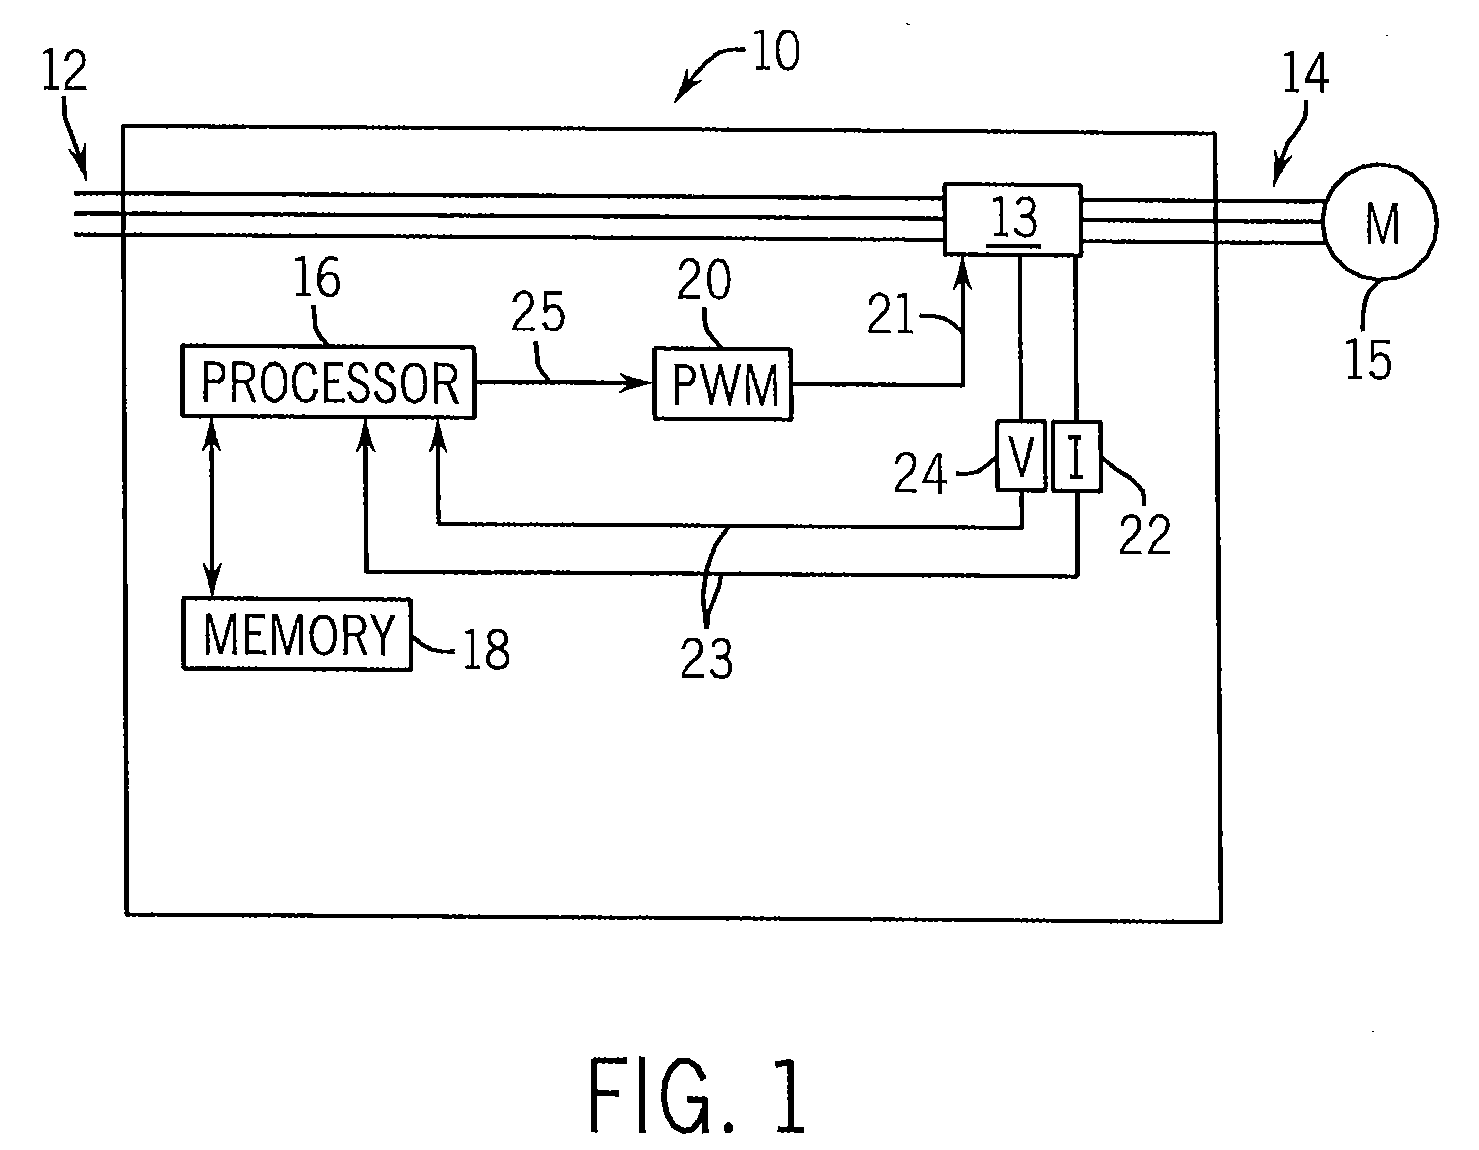 Method and Apparatus for Estimating Rotor Position in a Sensorless Synchronous Motor